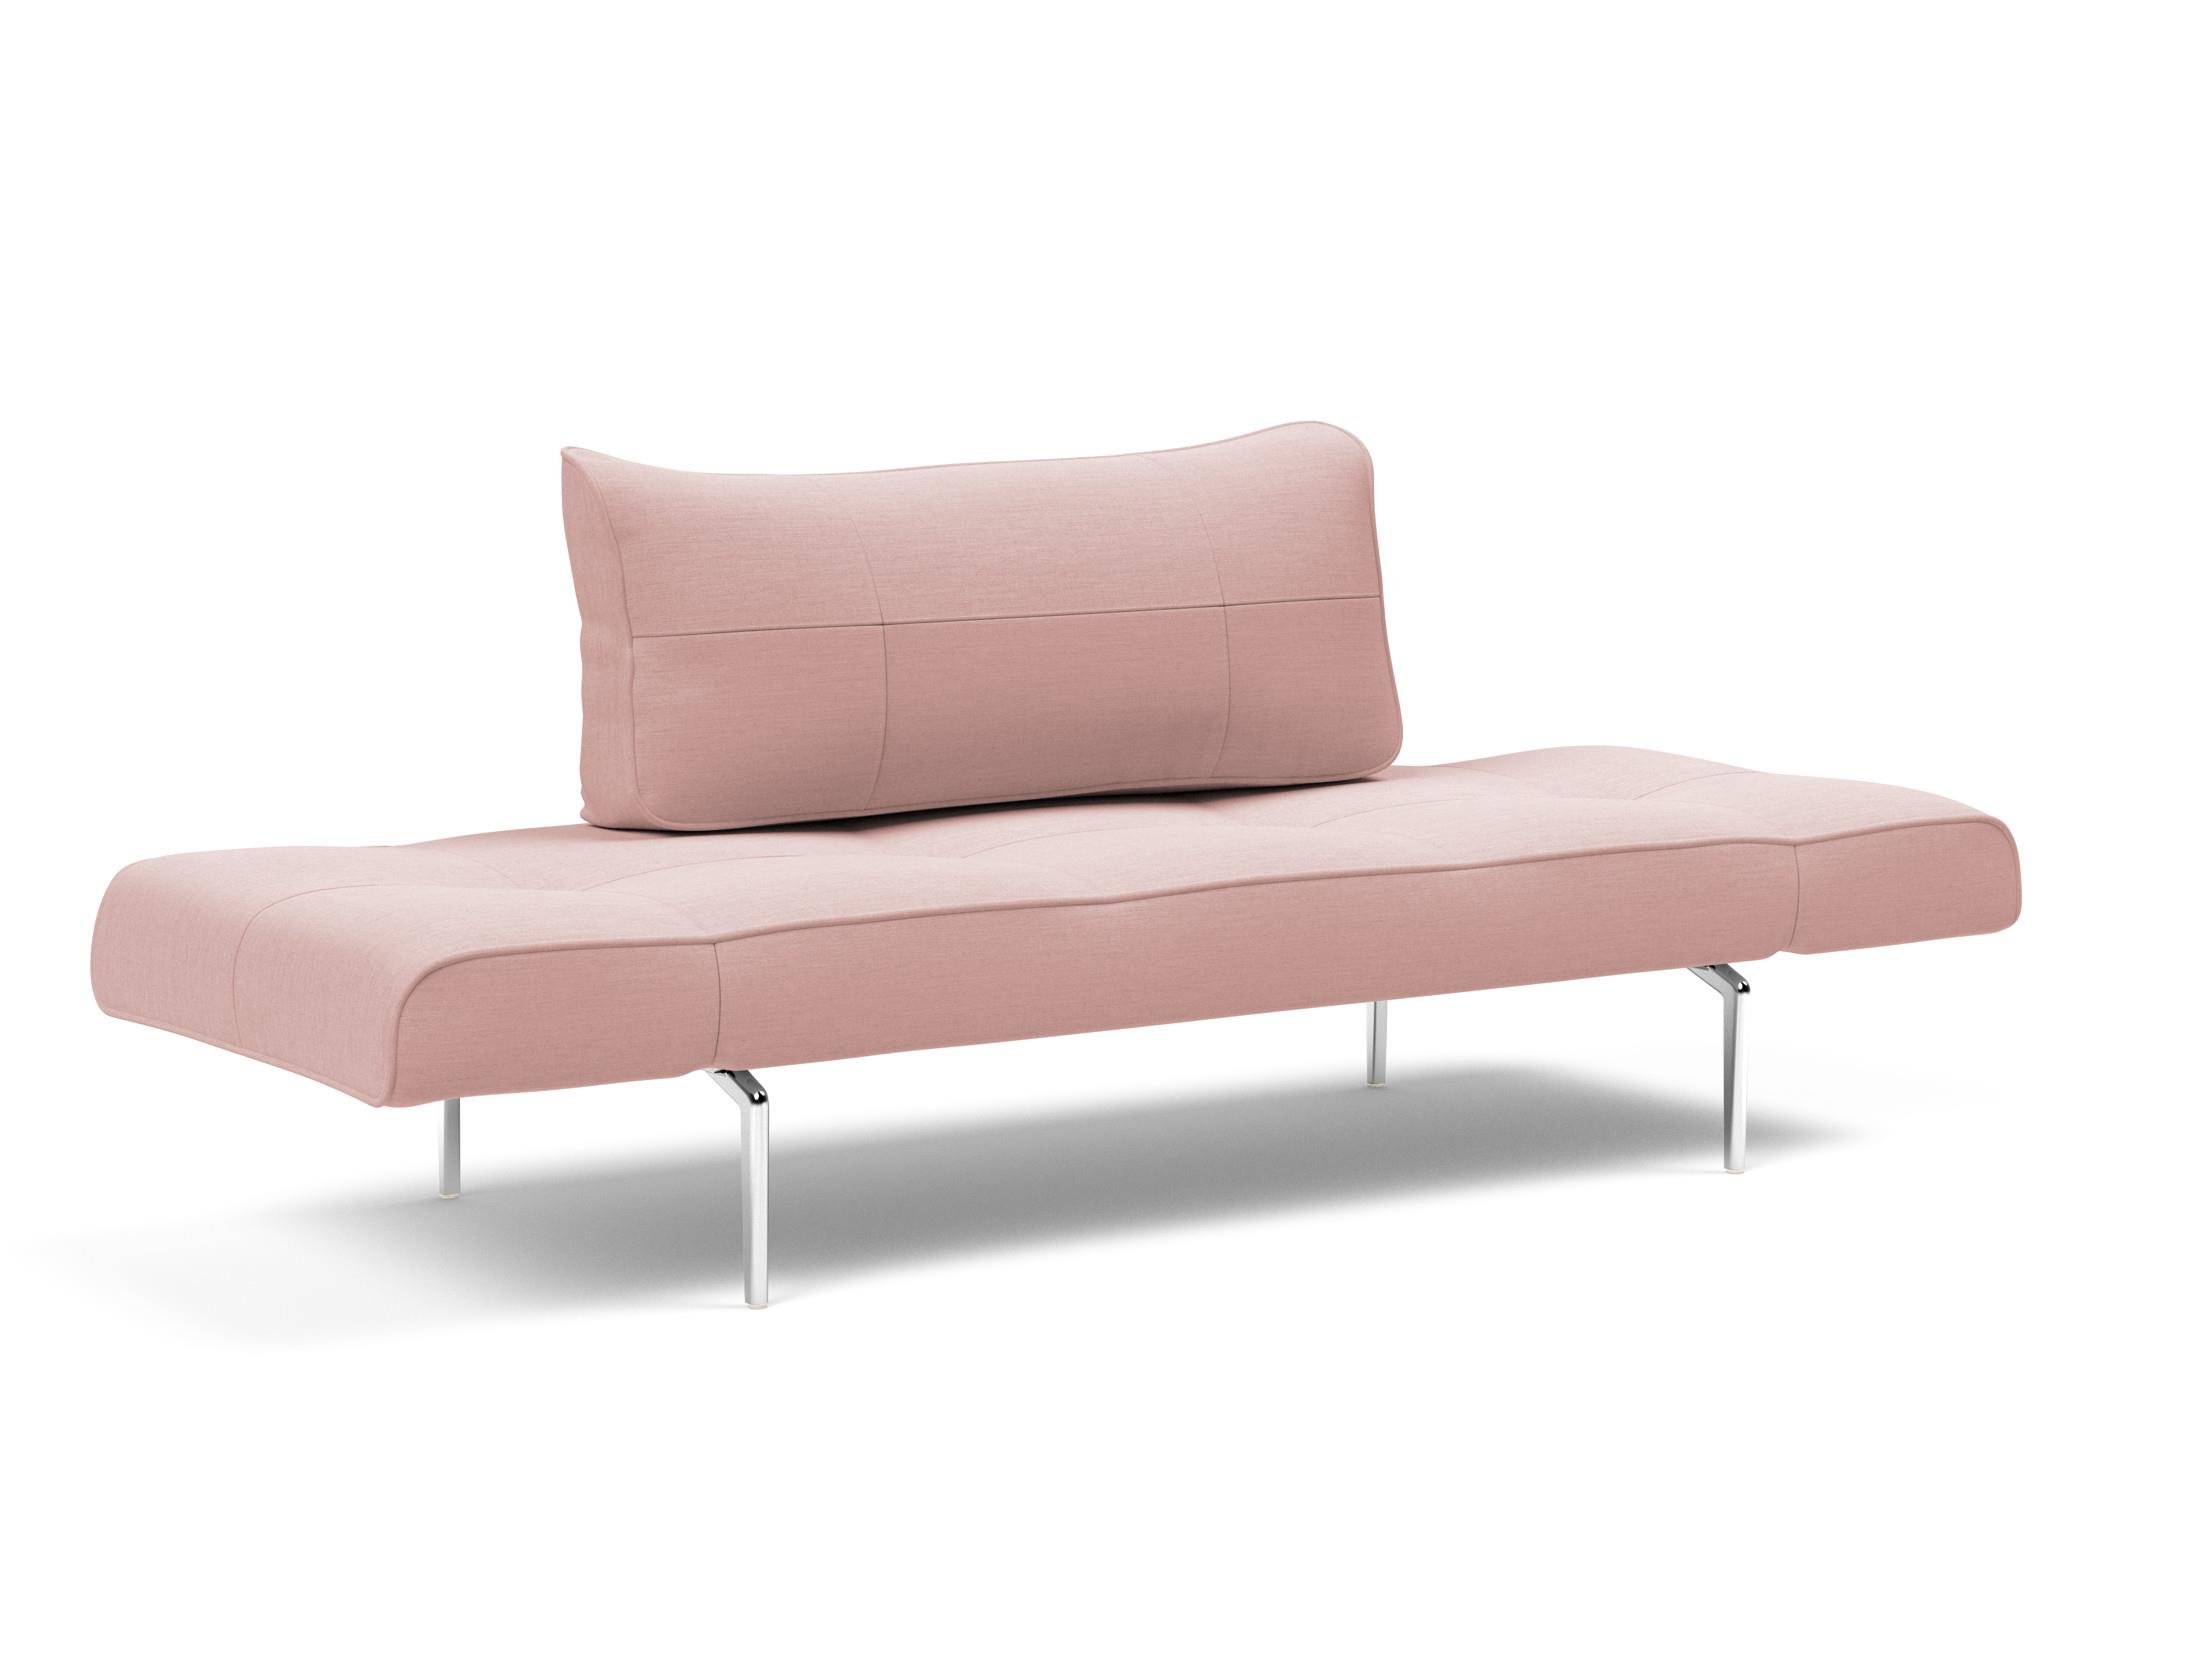 Zeal-Straw-Daybed-570-p7-web.jpg